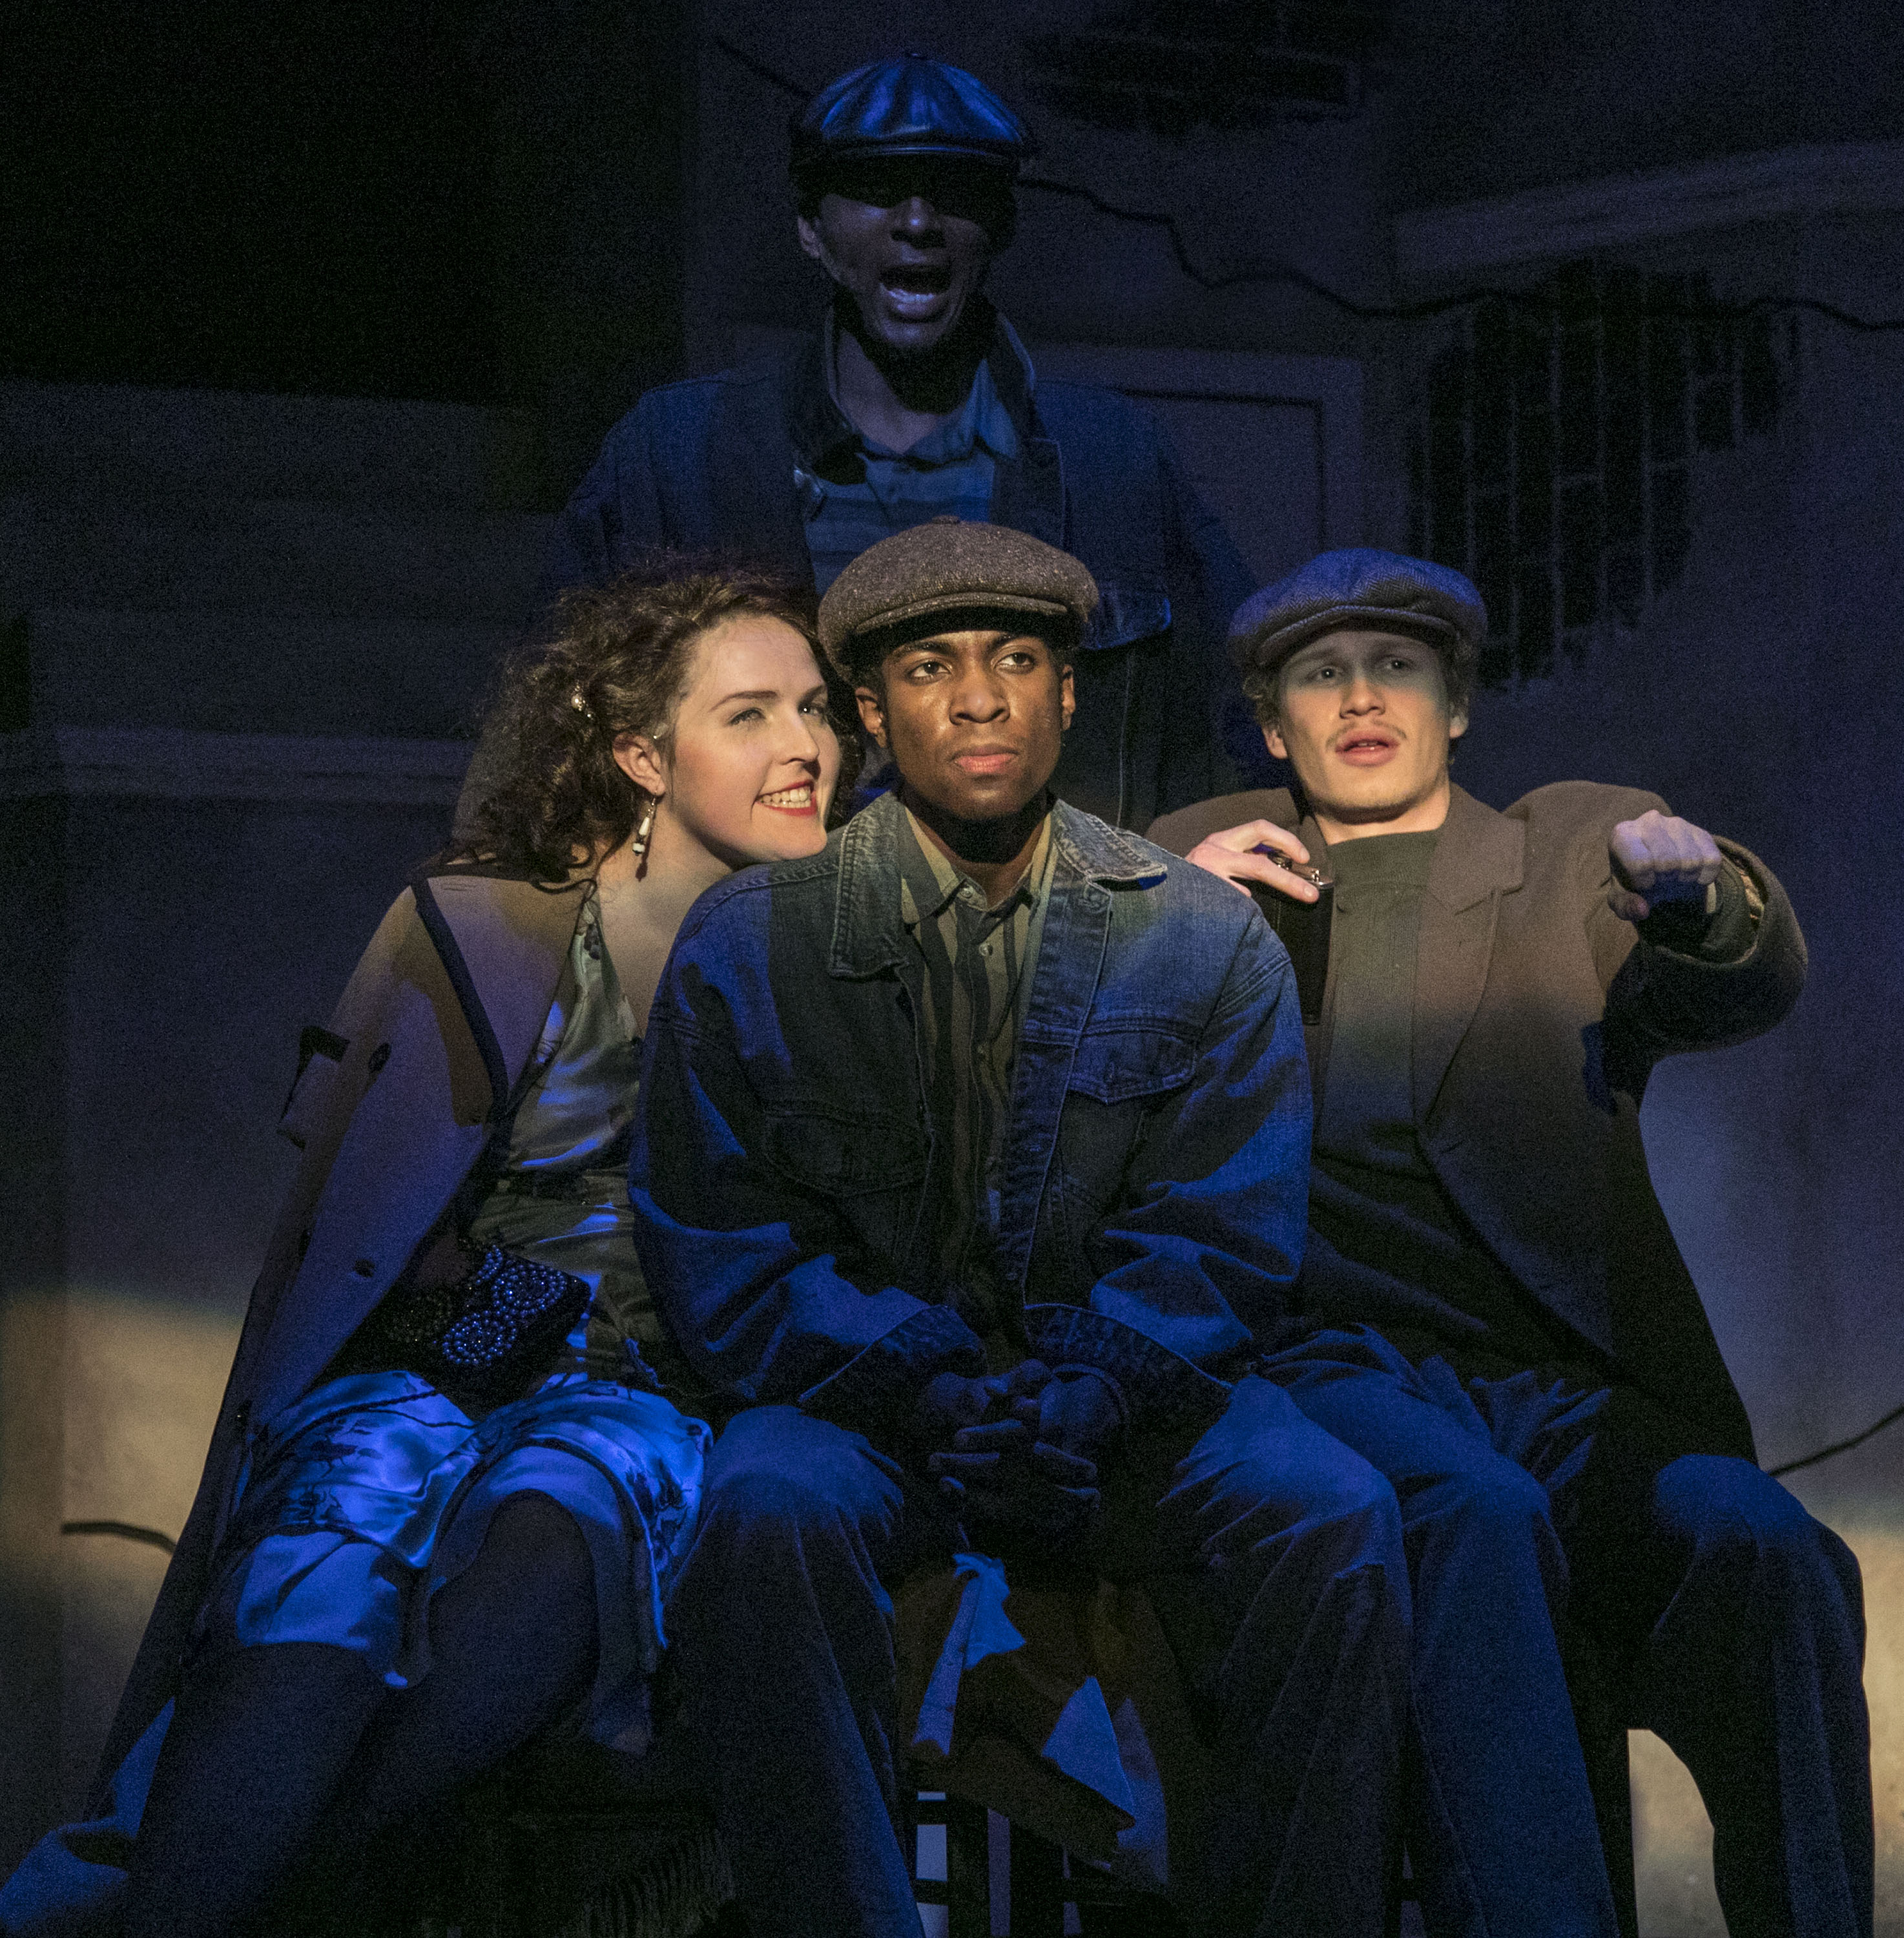 Constantly hounded by his inner demon, the Black Rat (Michael Morrow), standing, Bigger Thomas (Matthew James Elam) sits between Mary (Delaney Feener) and her socialist boyfriend Jan (Jack Lancaster) as they drive through the streets of Chicago in The Theatre School's production of "Native Son," being performed on the Fullerton Stage Feb. 9-18, 2018. Set in 1930s South Side Chicago, Bigger Thomas lands a job with a wealthy white family, but his fate is sealed when a violent act unleashes a chain of events that cannot be undone. The play, based on the novel by Richard Wright, is directed by DePaul graduate student Mikael Burke, and explores the systemic racism and poverty that oppressed Bigger Thomas from birth. (DePaul University/Jamie Moncrief)